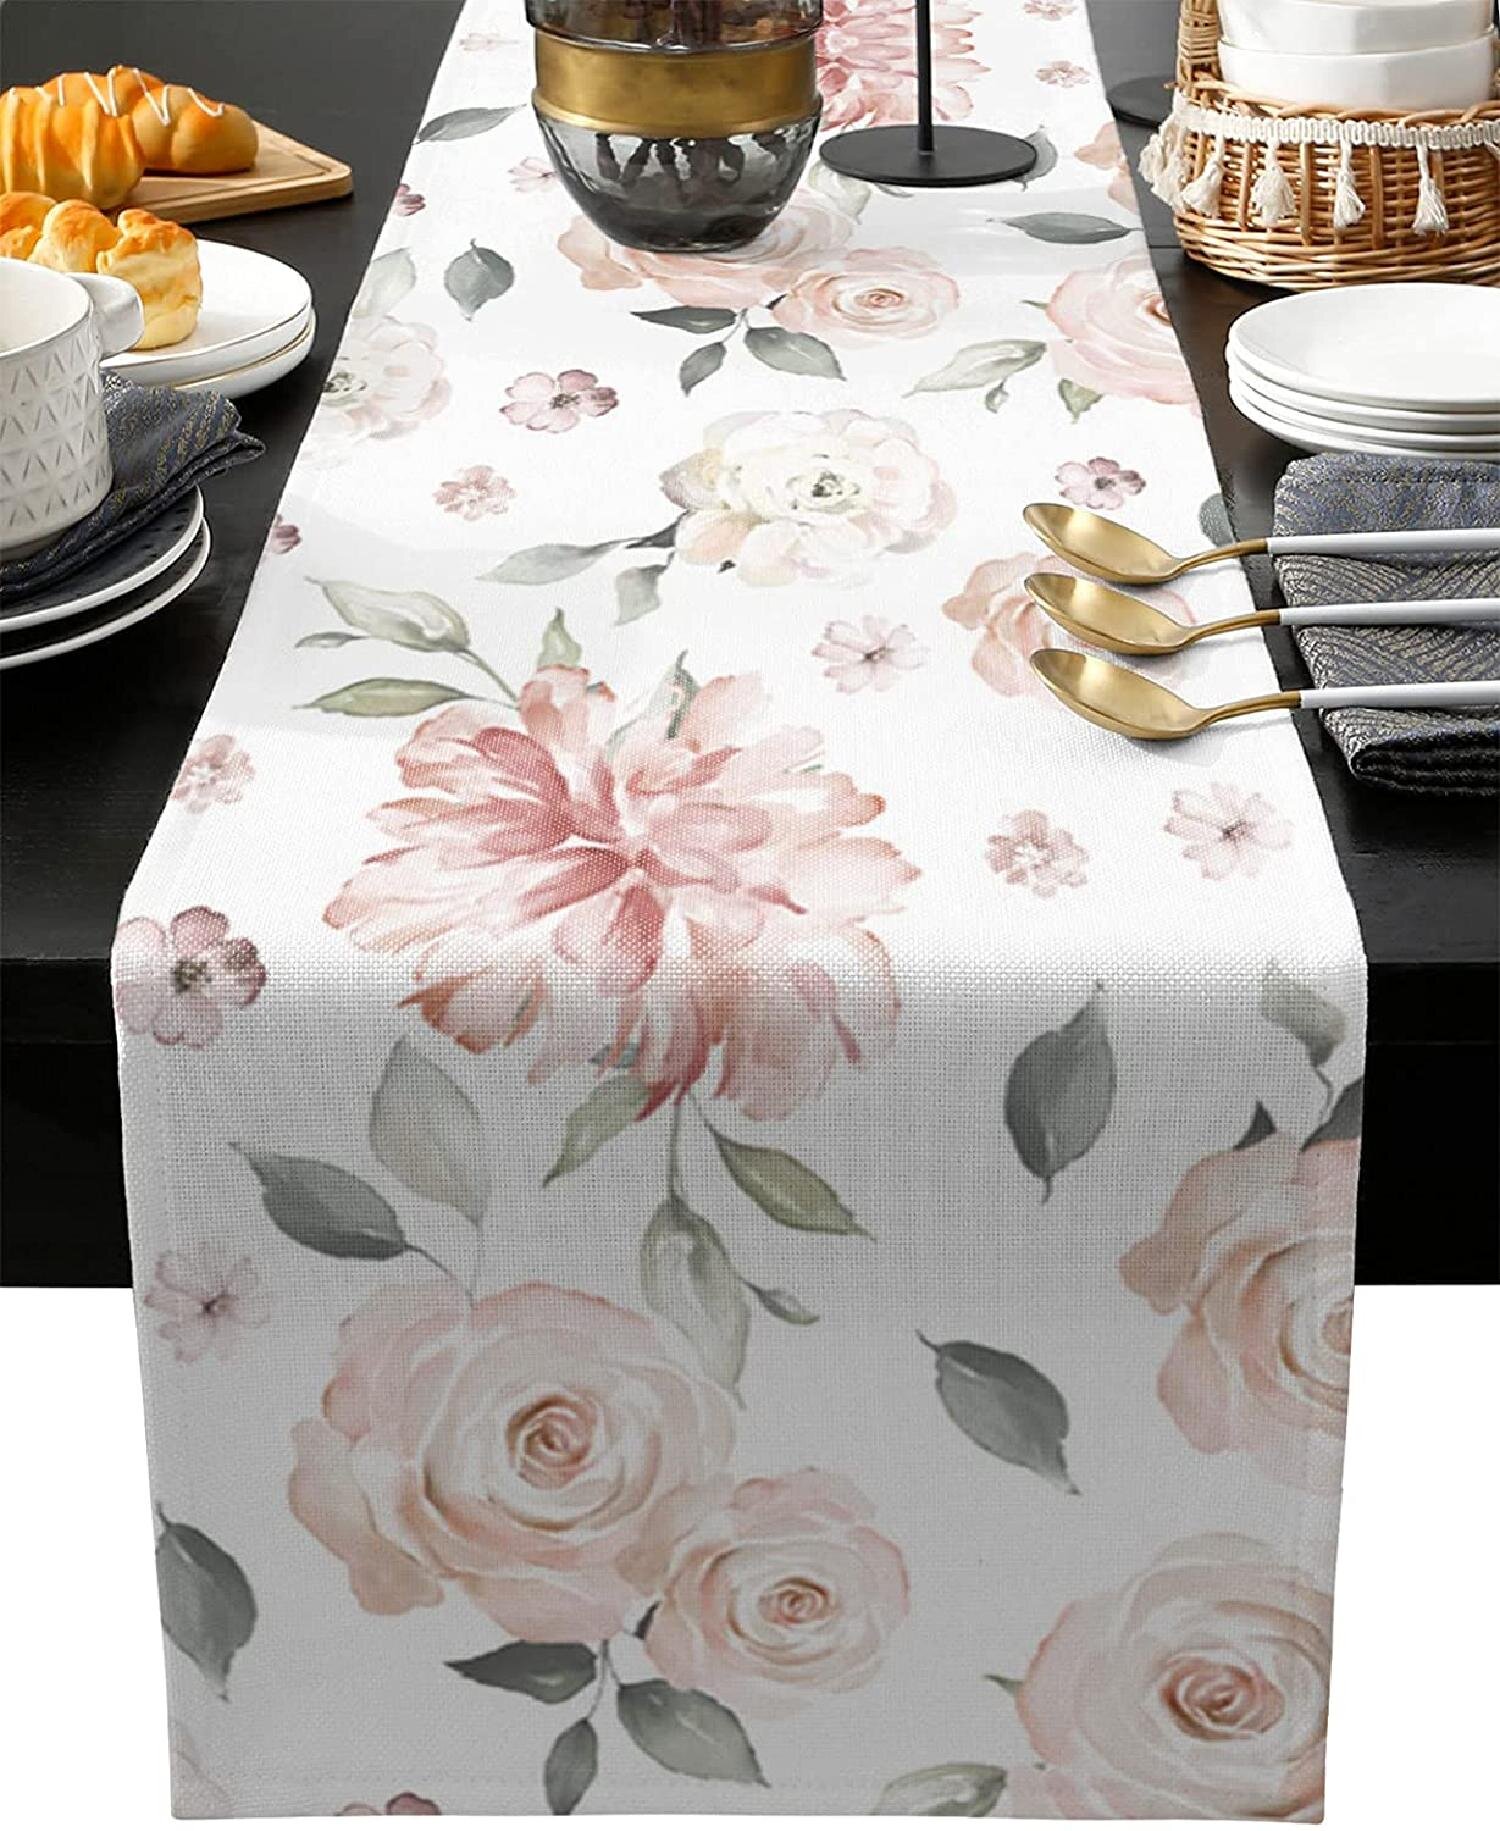 Large Stain-resistant tablecloth Linen Roses Flowers Hand Made Gift Napkin 